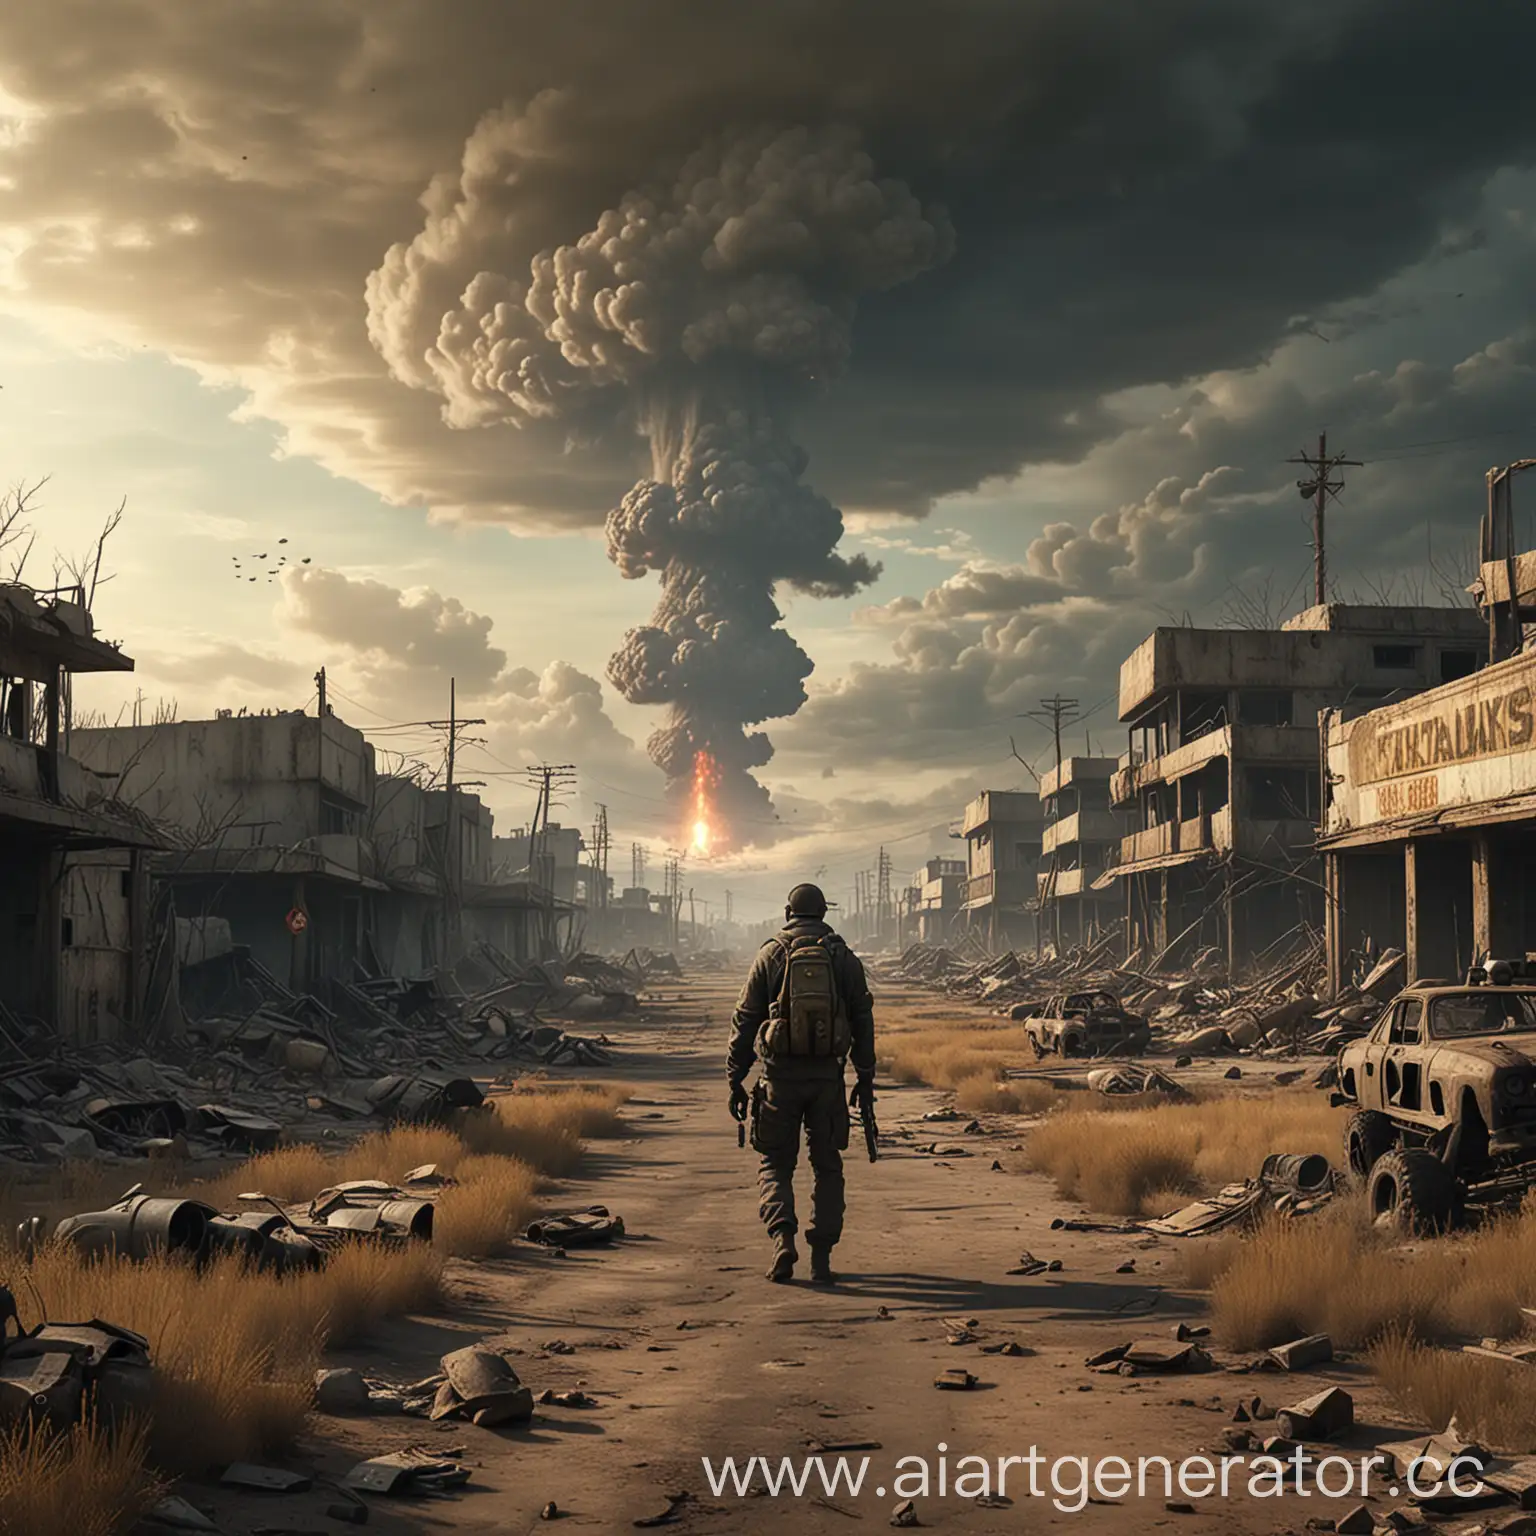 PostApocalyptic-Nuclear-Fallout-Landscape-with-Stalker-Vibe